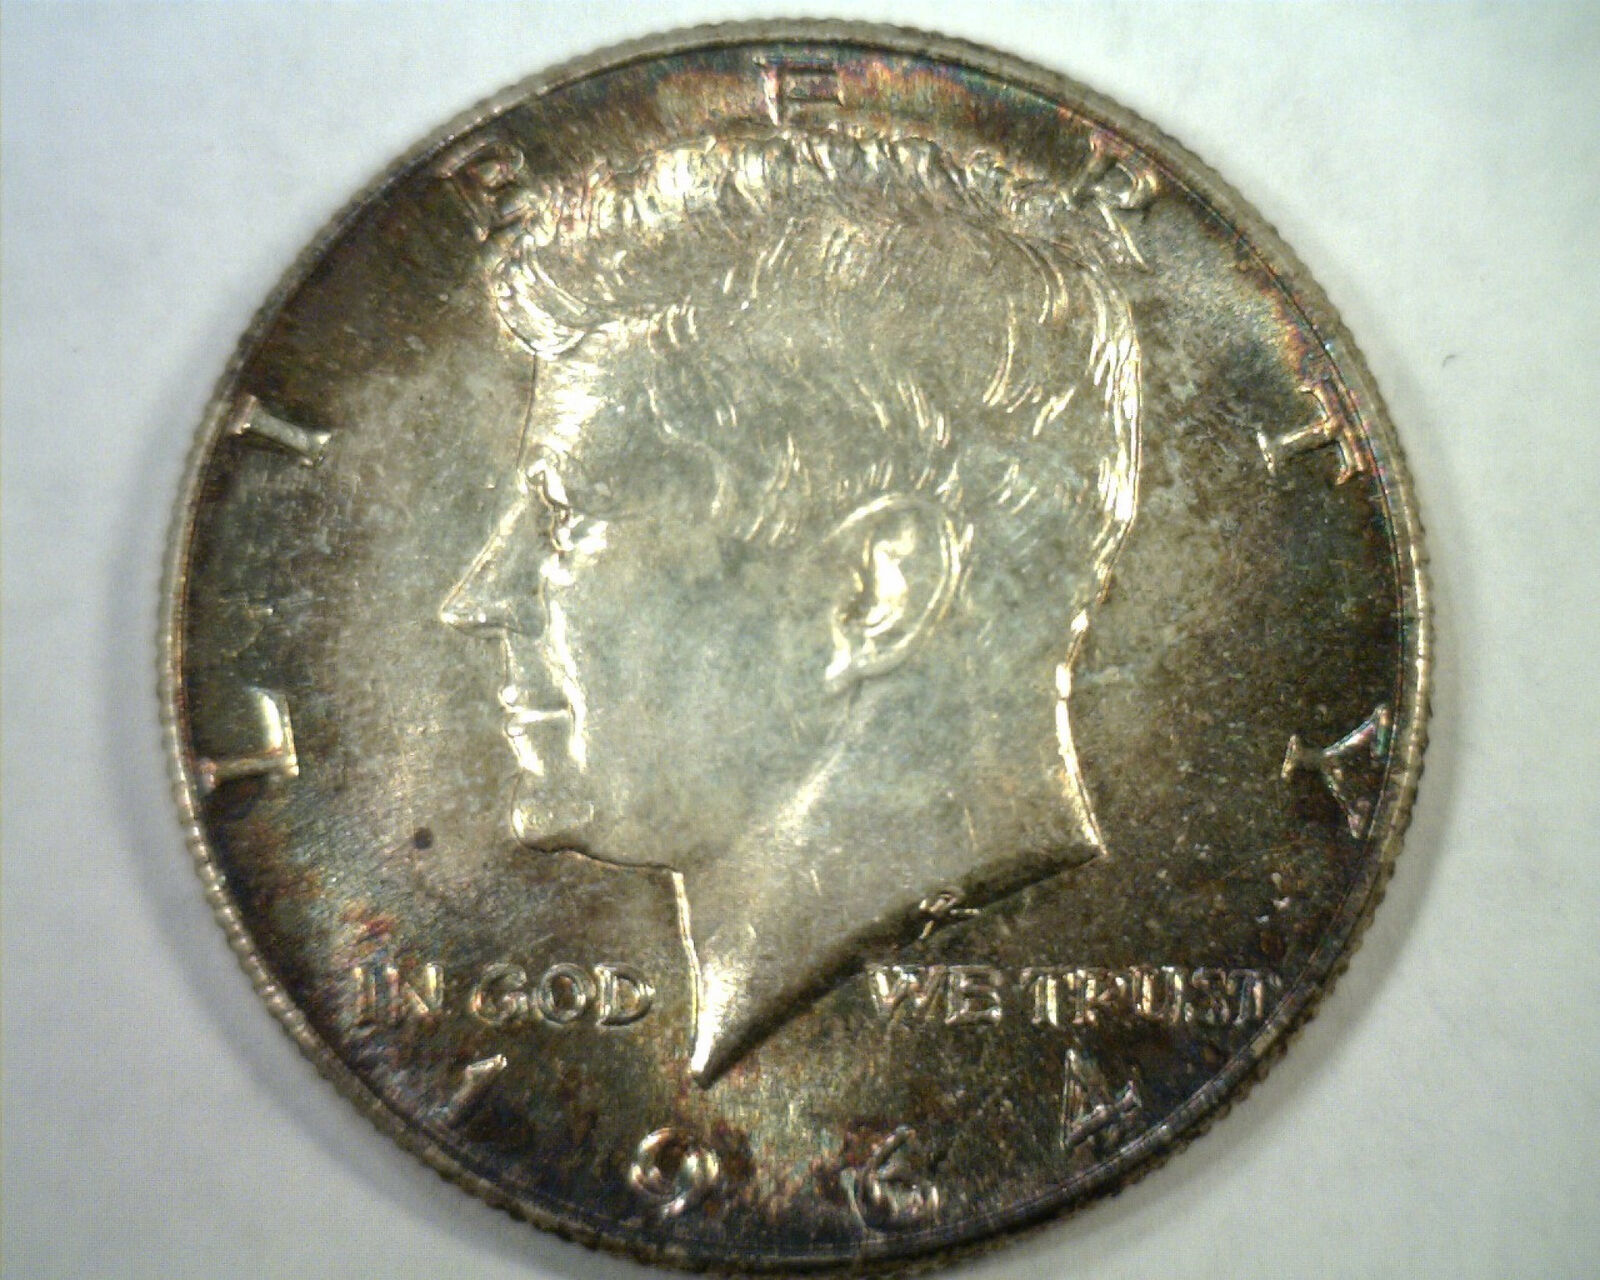 1964 KENNEDY HALF DOLLAR CHOICE UNCIRCULATED/ GEM SUPER ATTRACTIVE TONING/ COLOR - $65.00